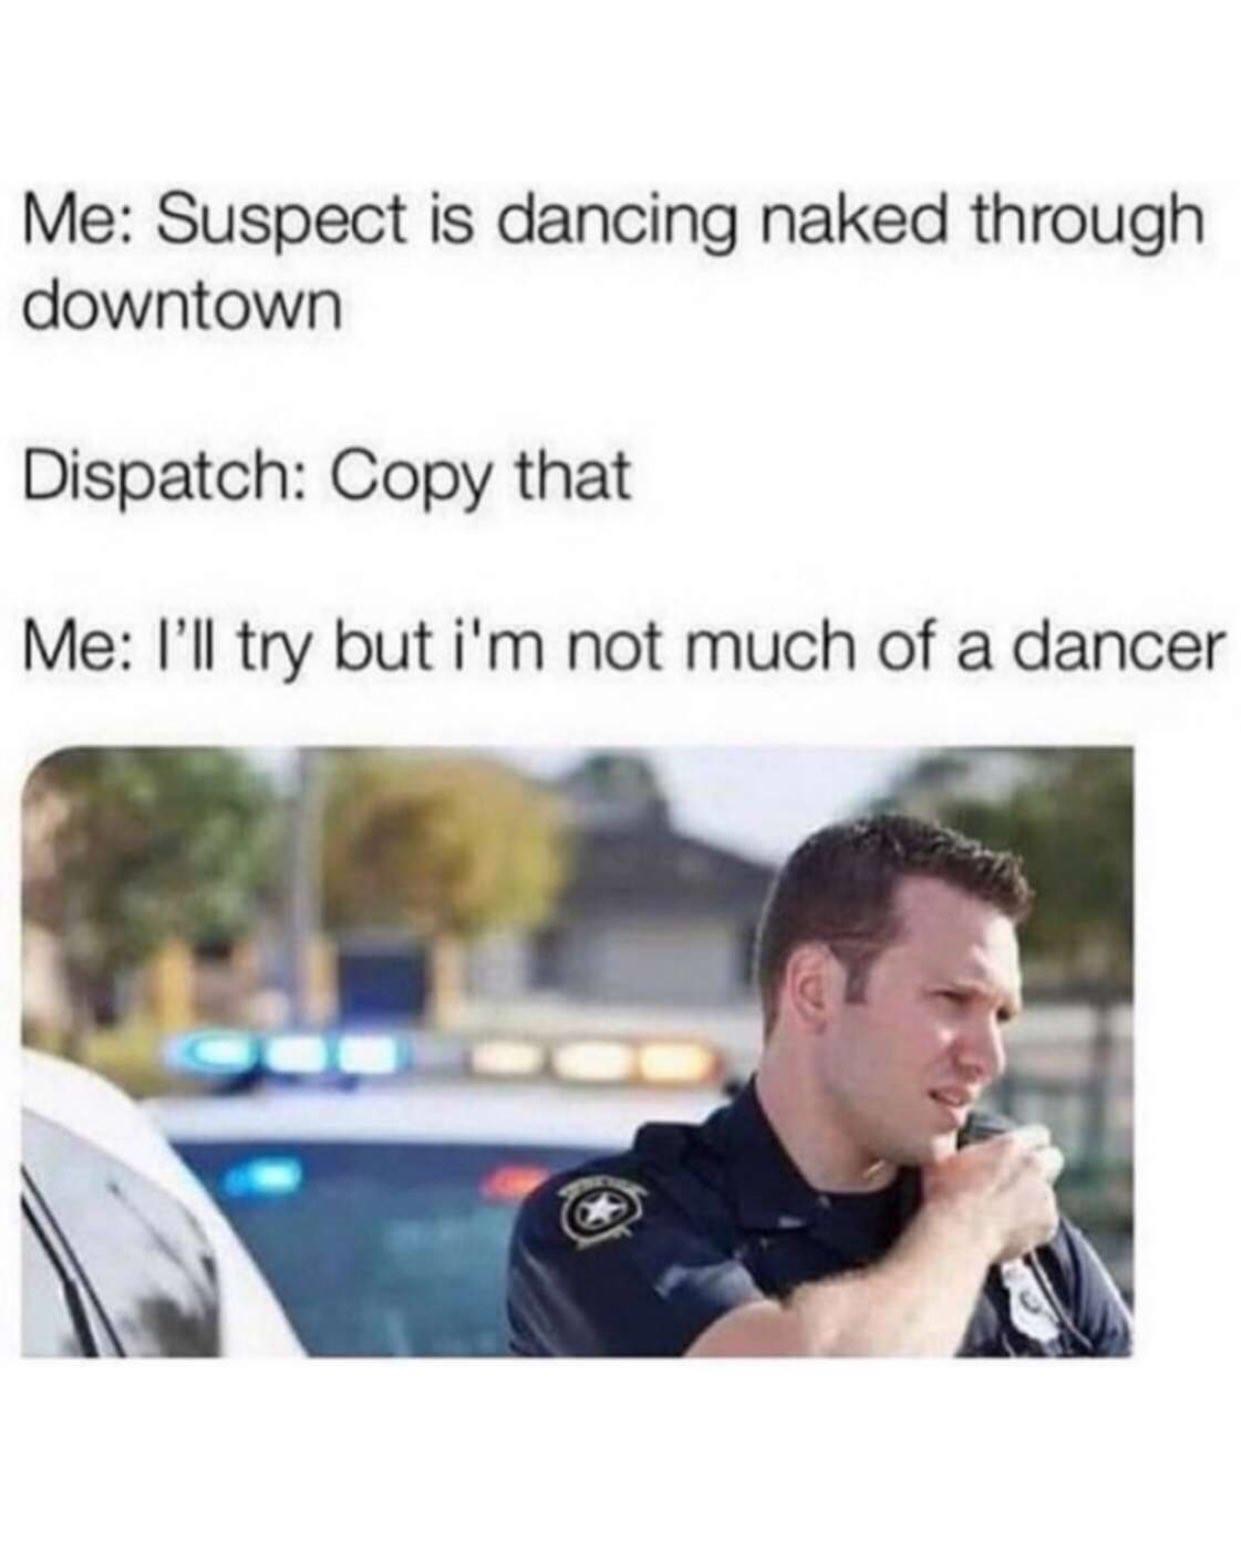 suspect is dancing naked through downtown - Me Suspect is dancing naked through downtown Dispatch Copy that Me I'll try but i'm not much of a dancer